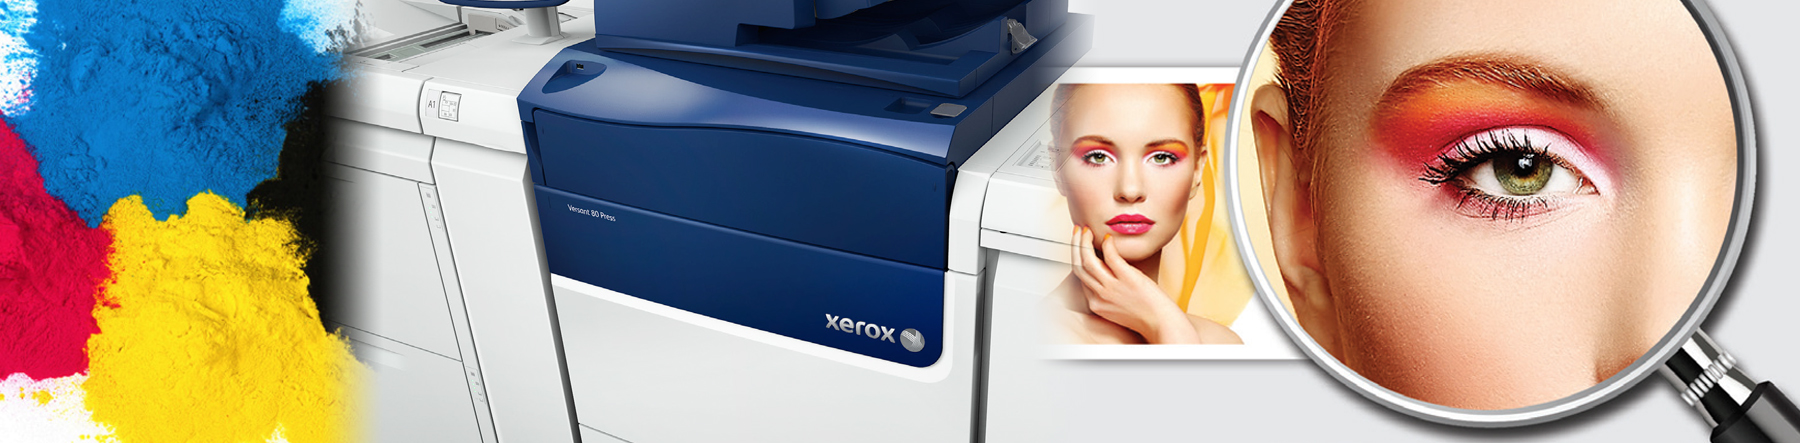 Xerox Production Equipment & Digital | Repro Products